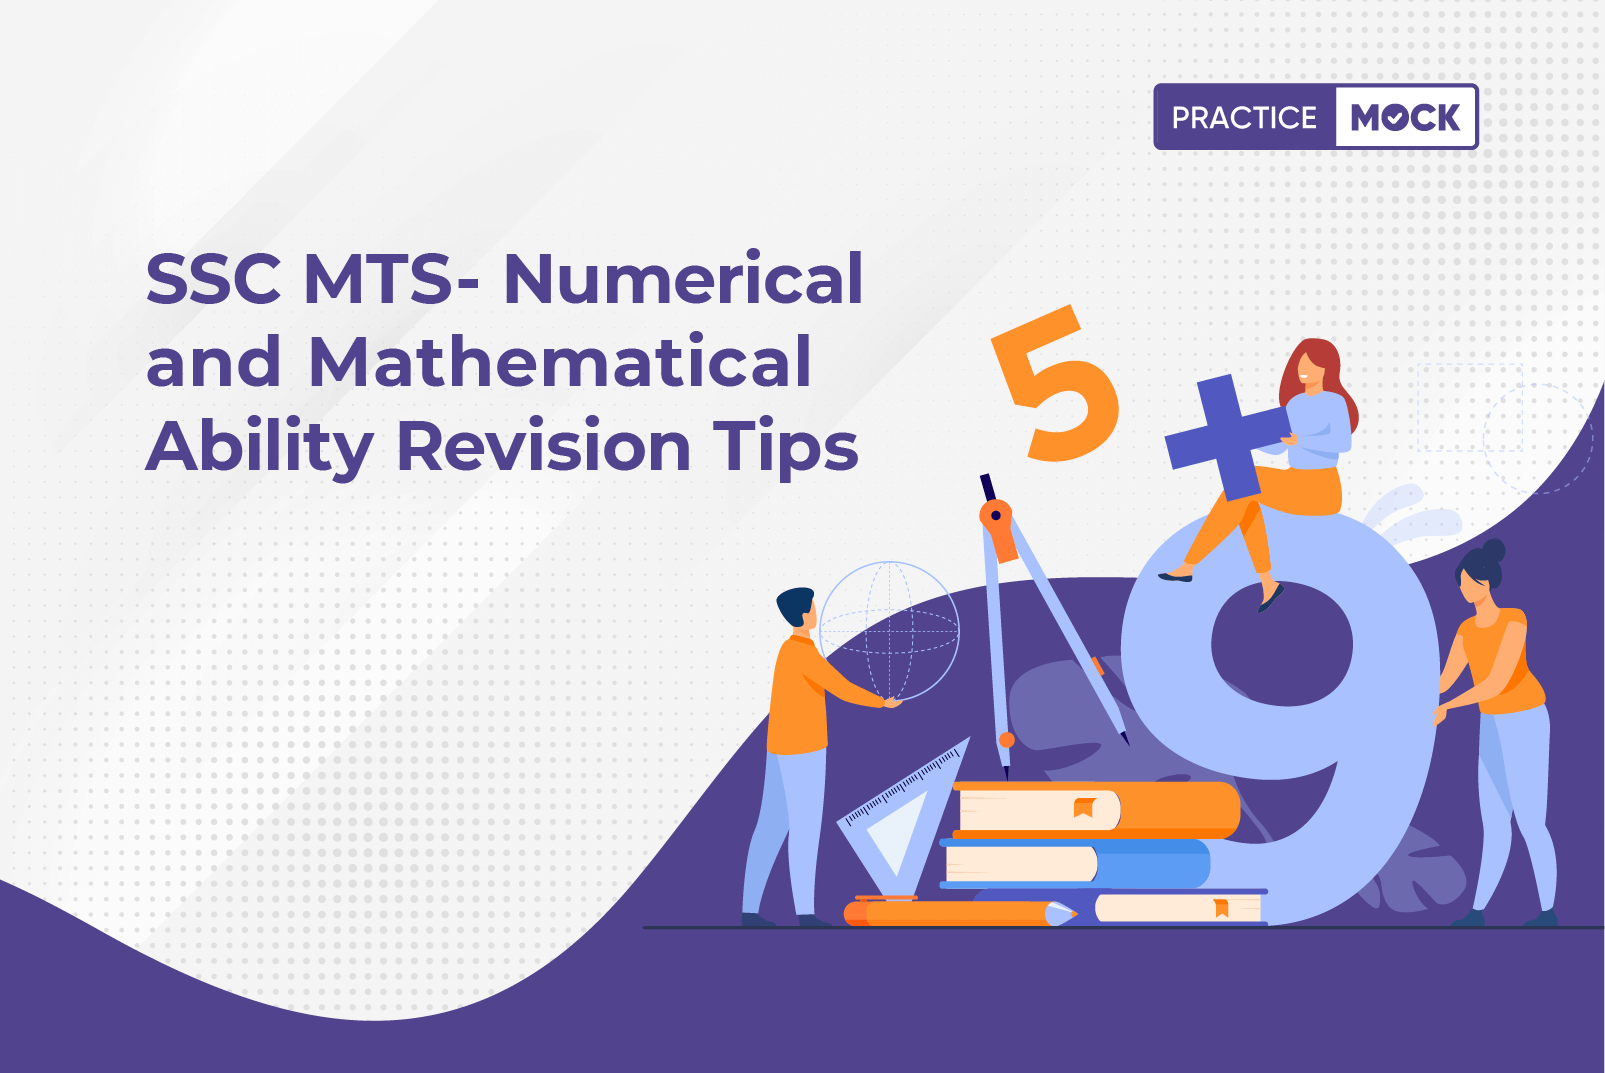 SSC MTS- Numerical and Mathematical Ability Revision Tips